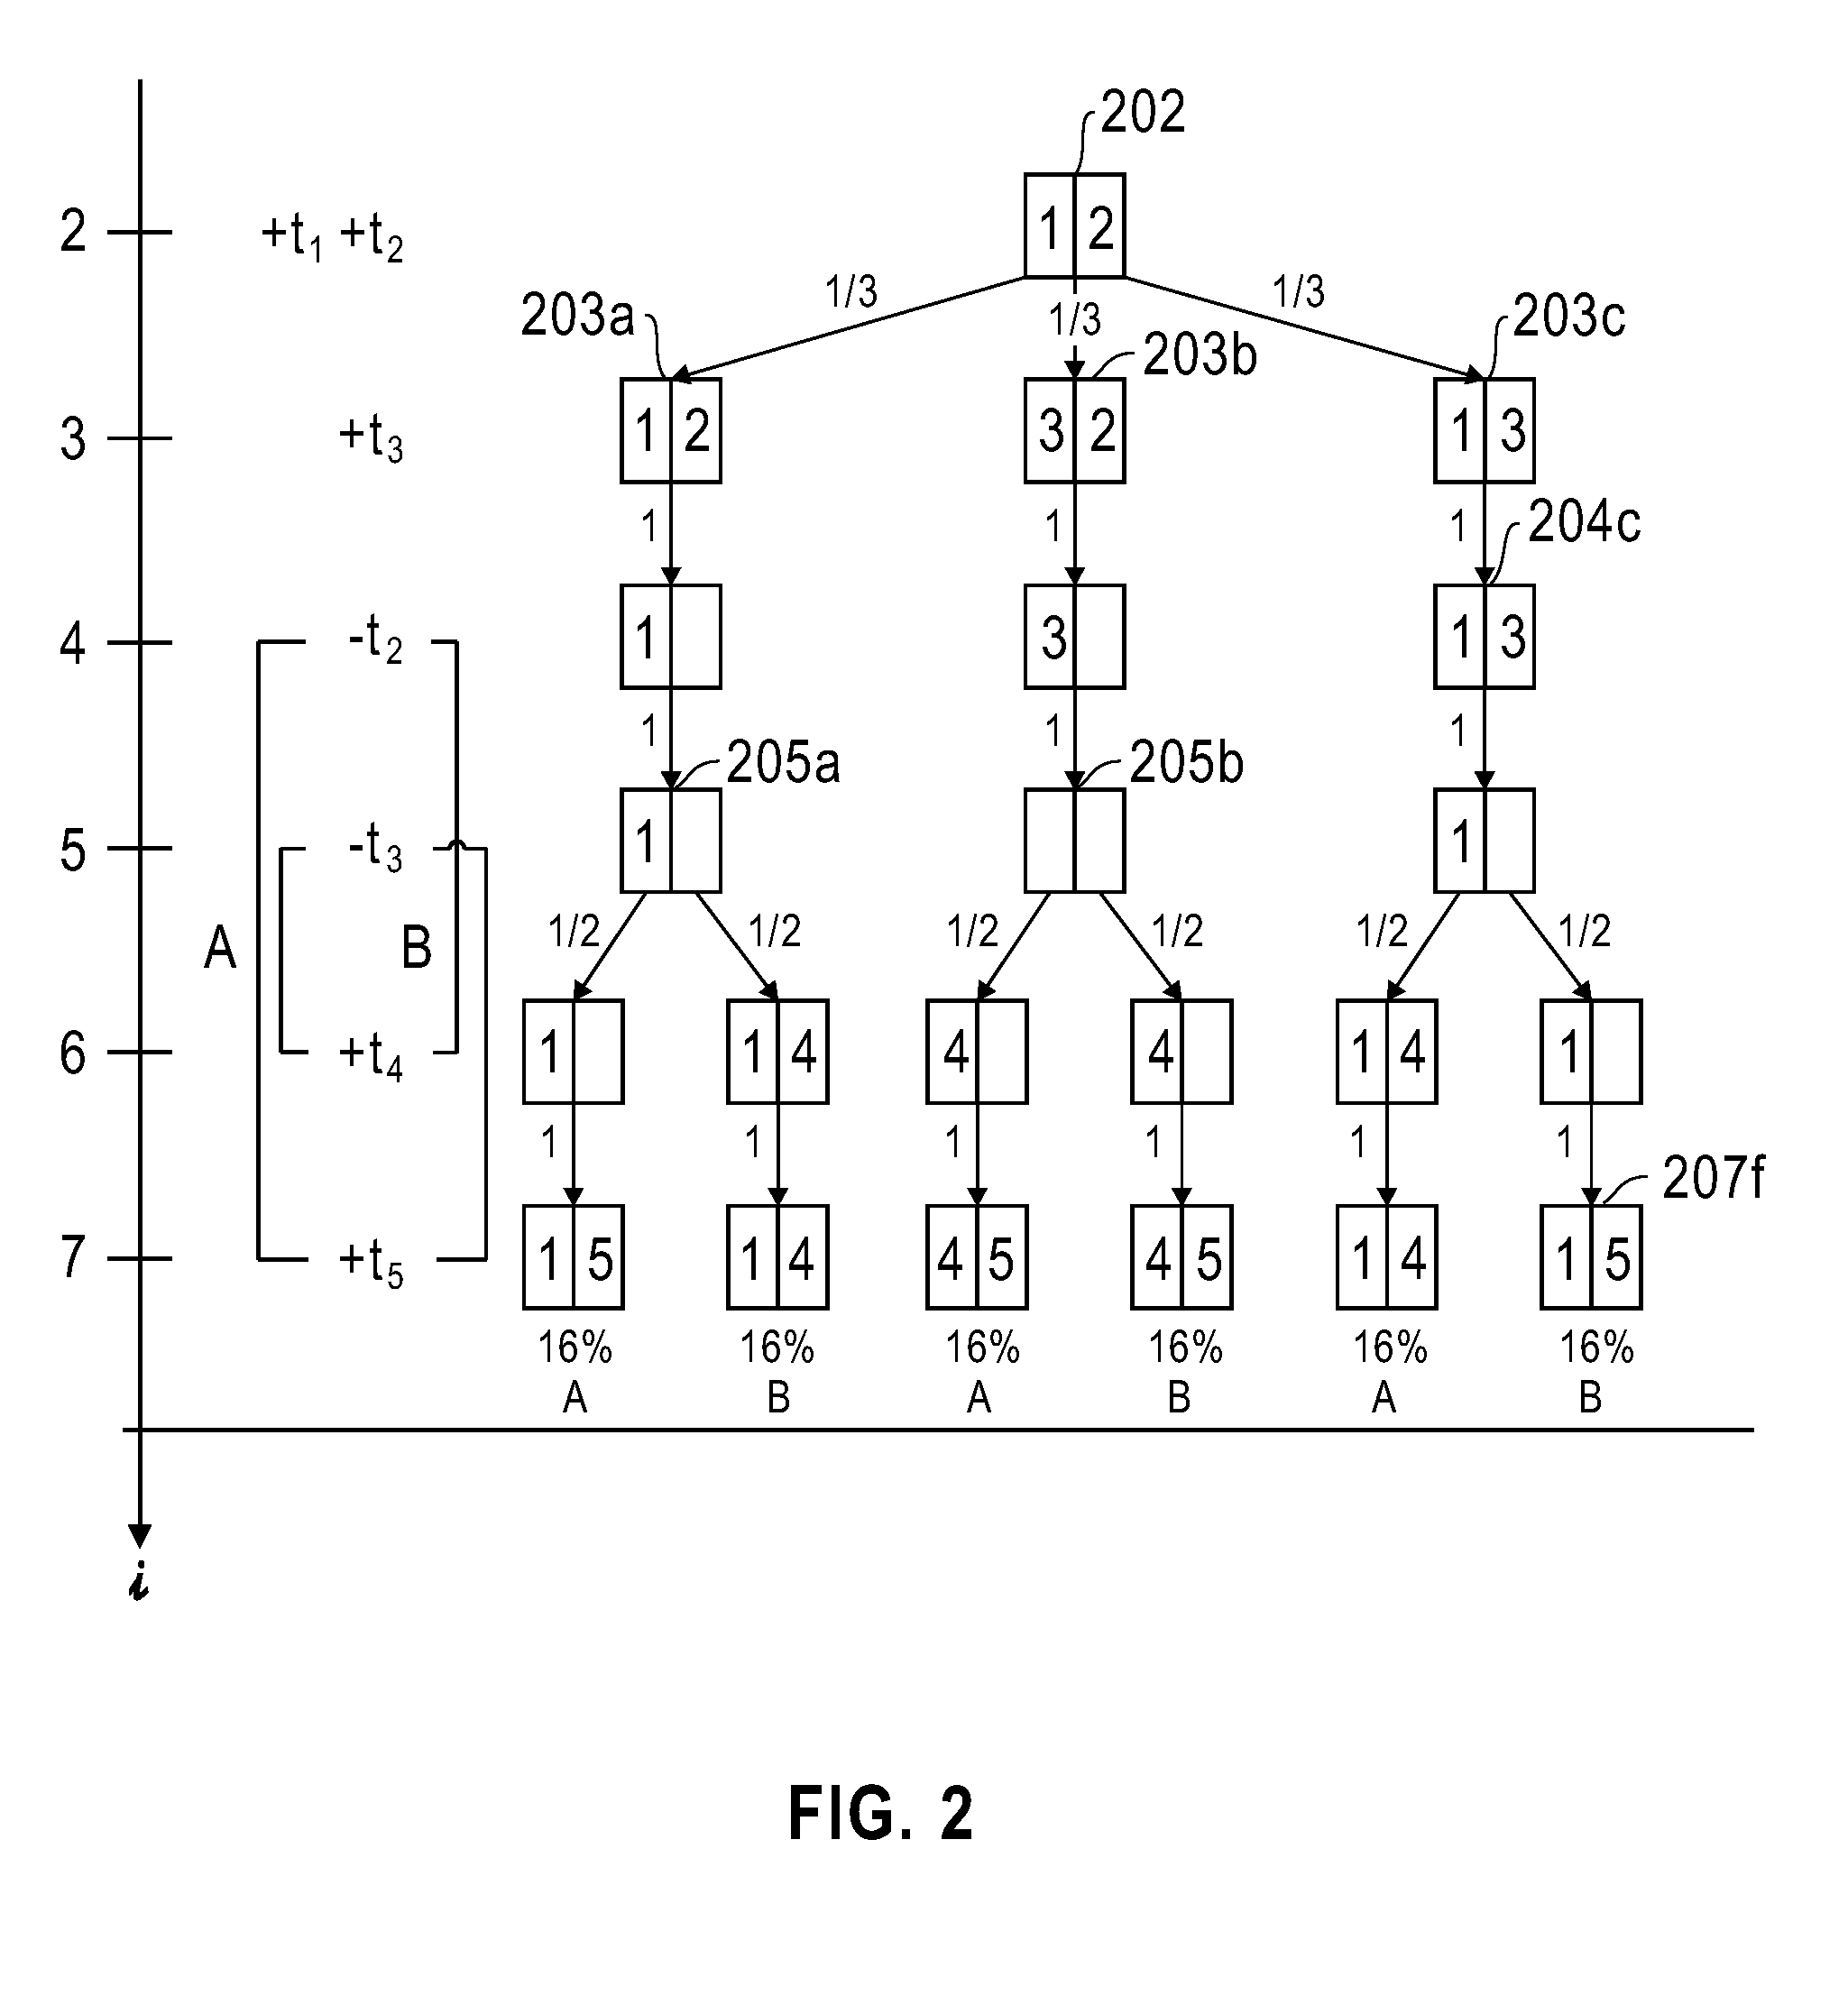 Method for maintaining a sample synopsis under arbitrary insertions and deletions